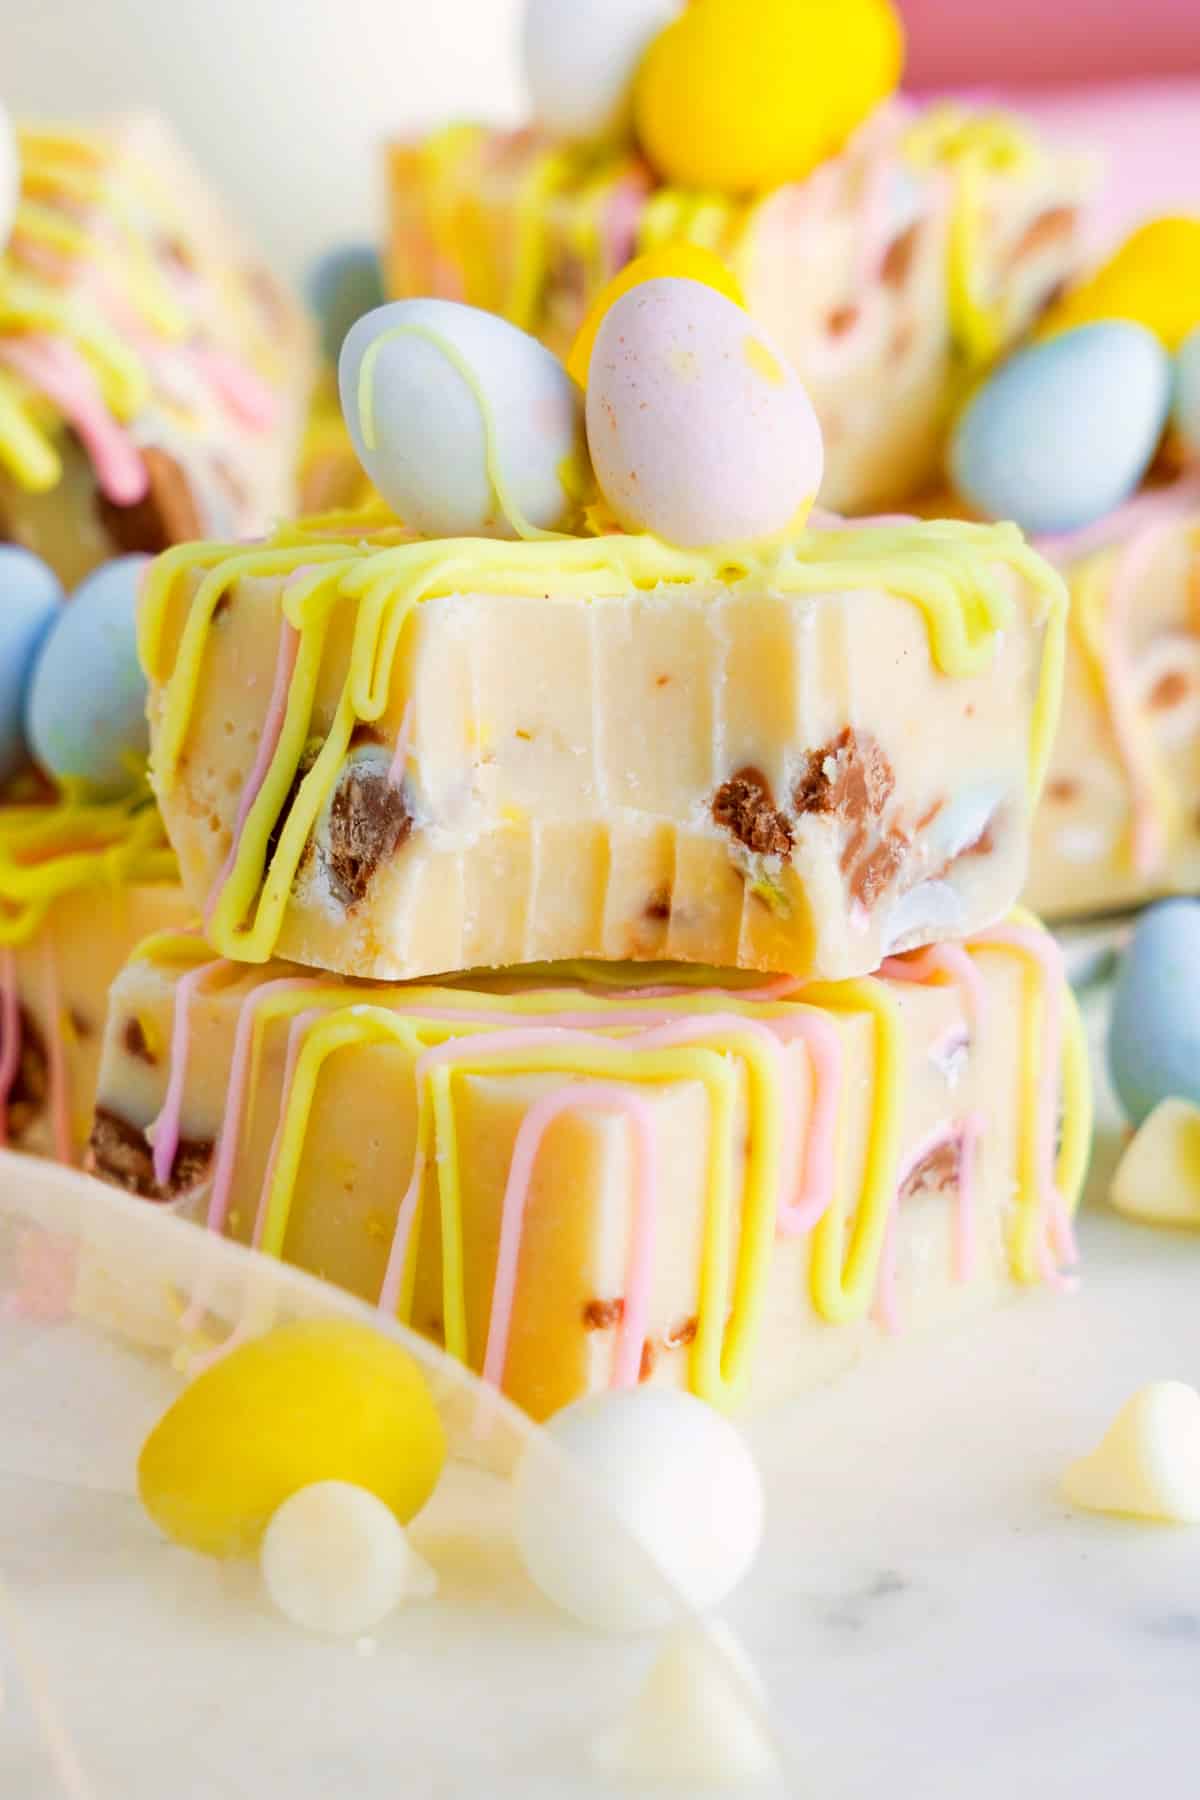 Two pieces of stacked white chocolate Easter fudge full of chocolate mini eggs with a bite missing on the top piece.